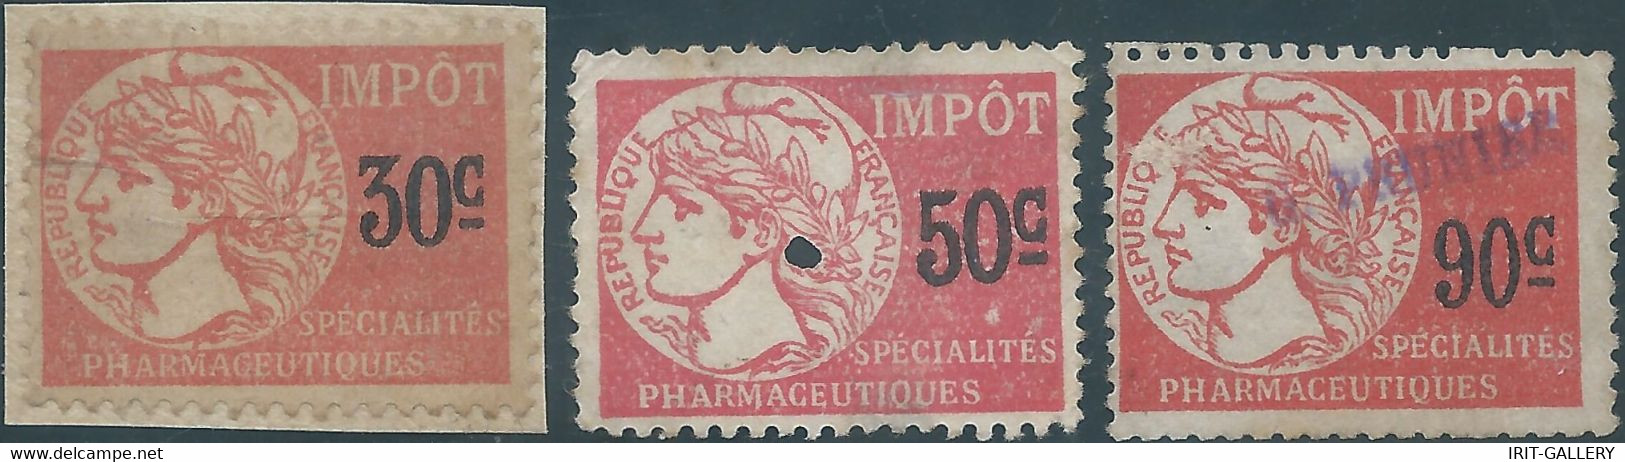 FRANCE,Revenue Stamps Fiscal Tax PHARMACEUTICAL SPECIALTIES,30-50-90c,Used - Timbres